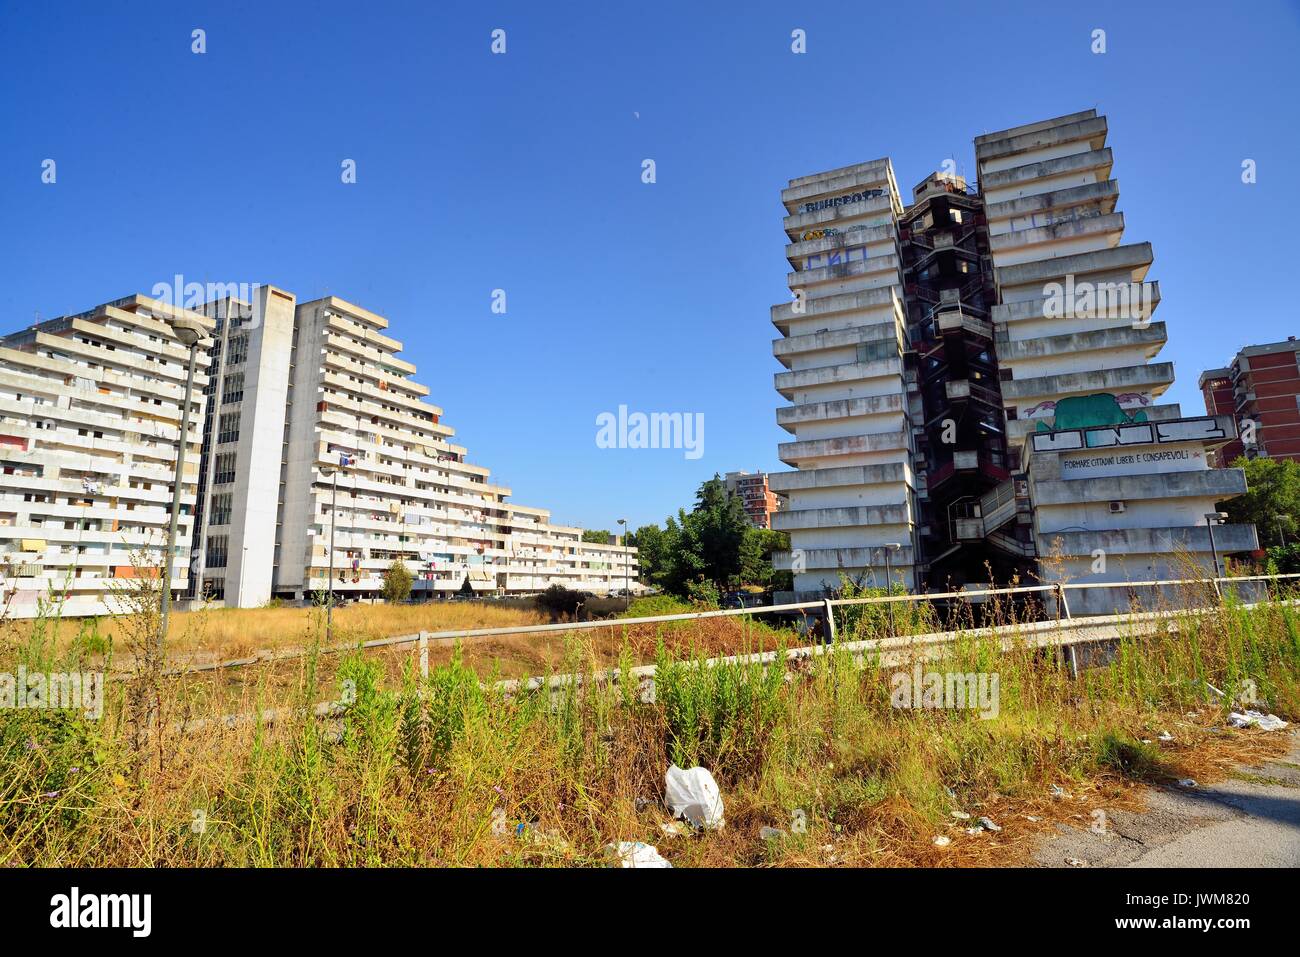 Naples, Italy. Scampia Vele are residential buildings built in the homonymous district of Naples between 1962 and 1975. The movie Gomorrah by Matteo Garrone was shot at the Vele, it has showin to the public the urban and human degradation of the neighborhood. Scampia is an important drug dealing center. Stock Photo